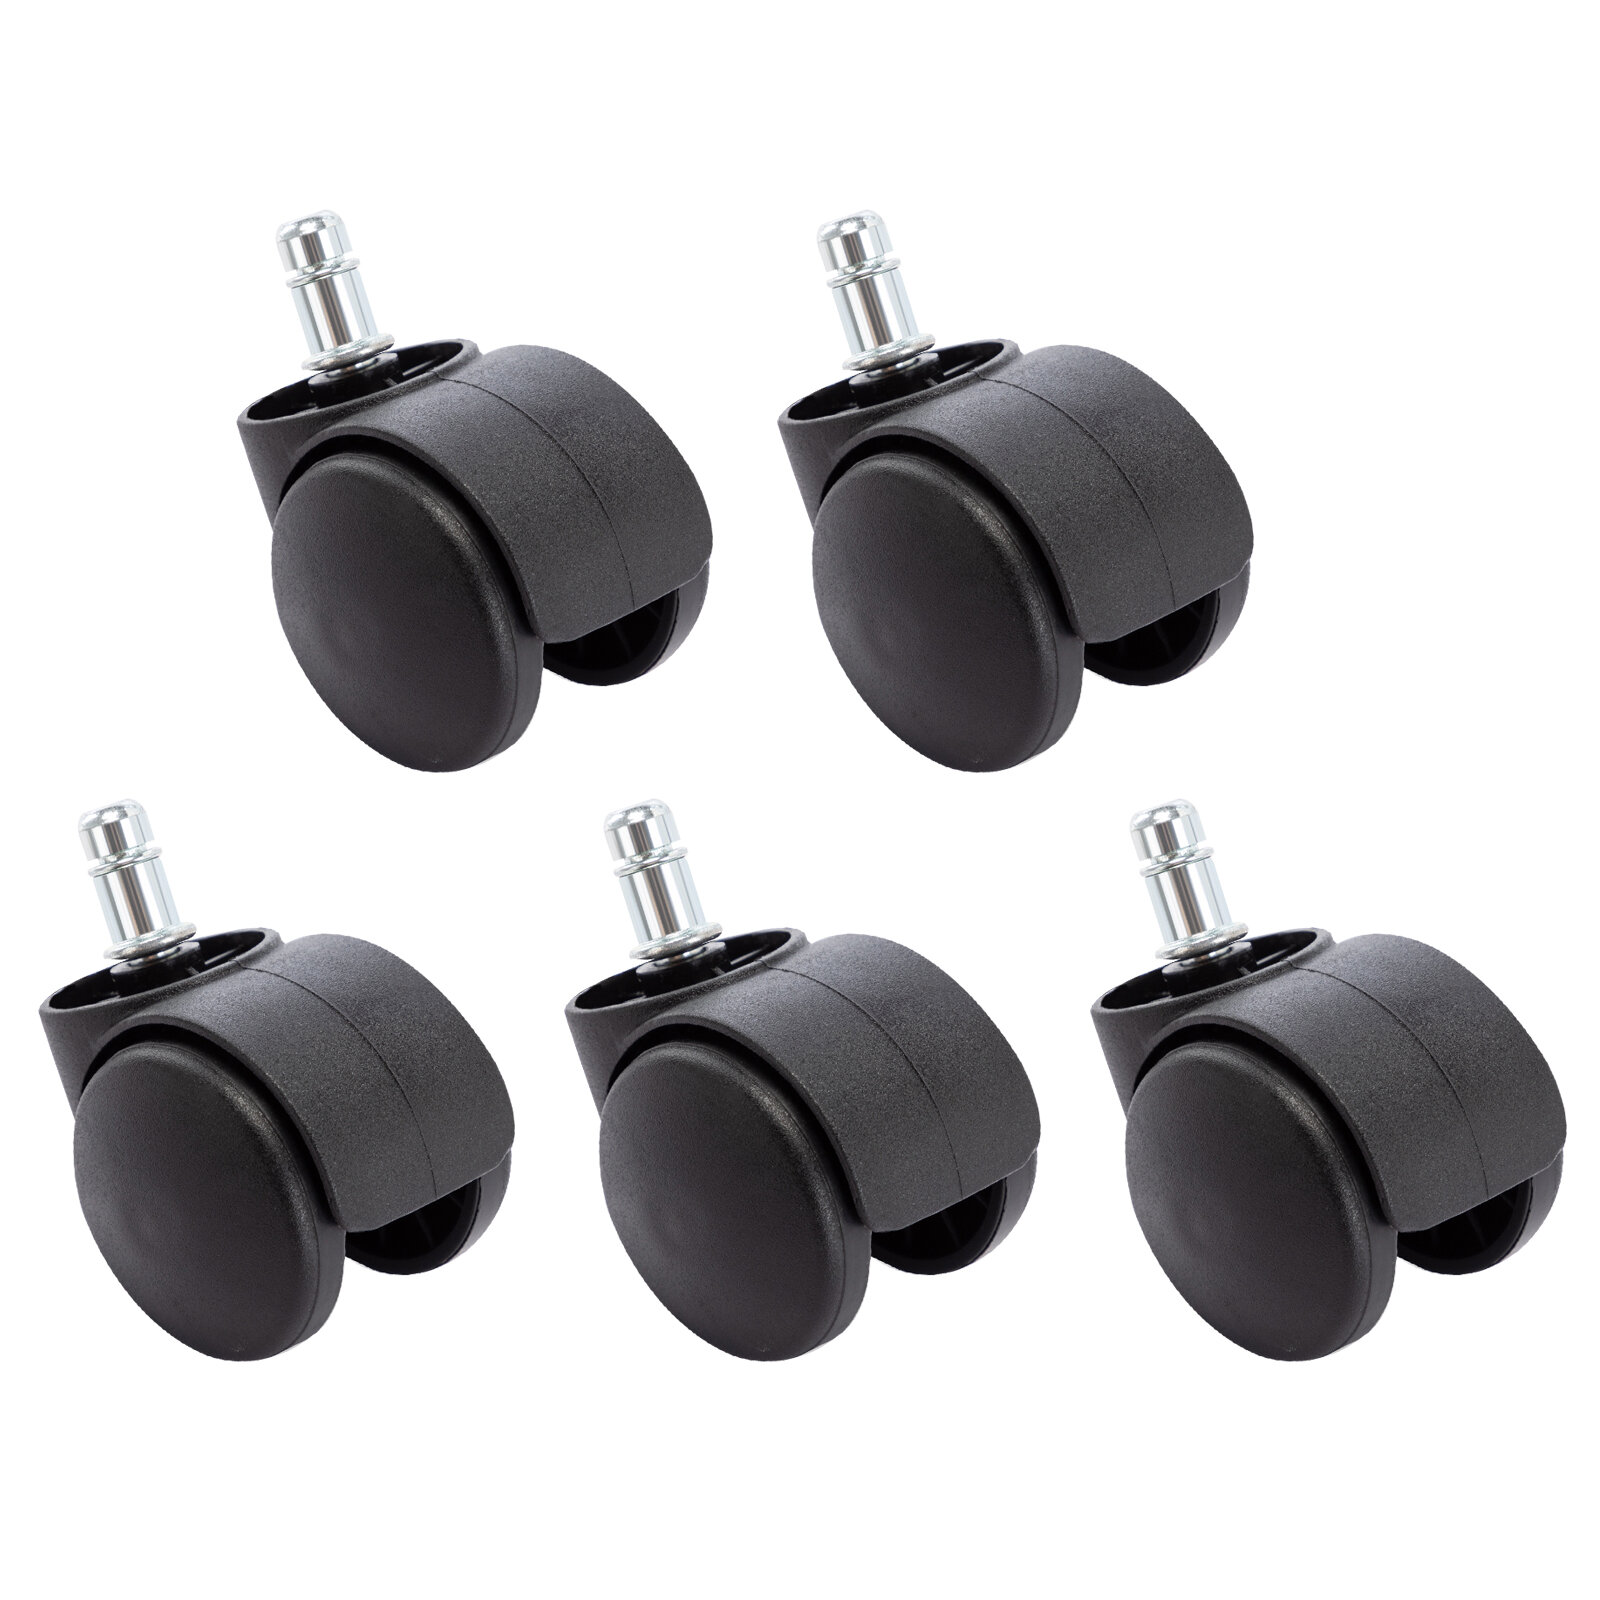 Qty of 5  Replacement Swivel Office Chair Wheels Casters  Universal Fit New! 